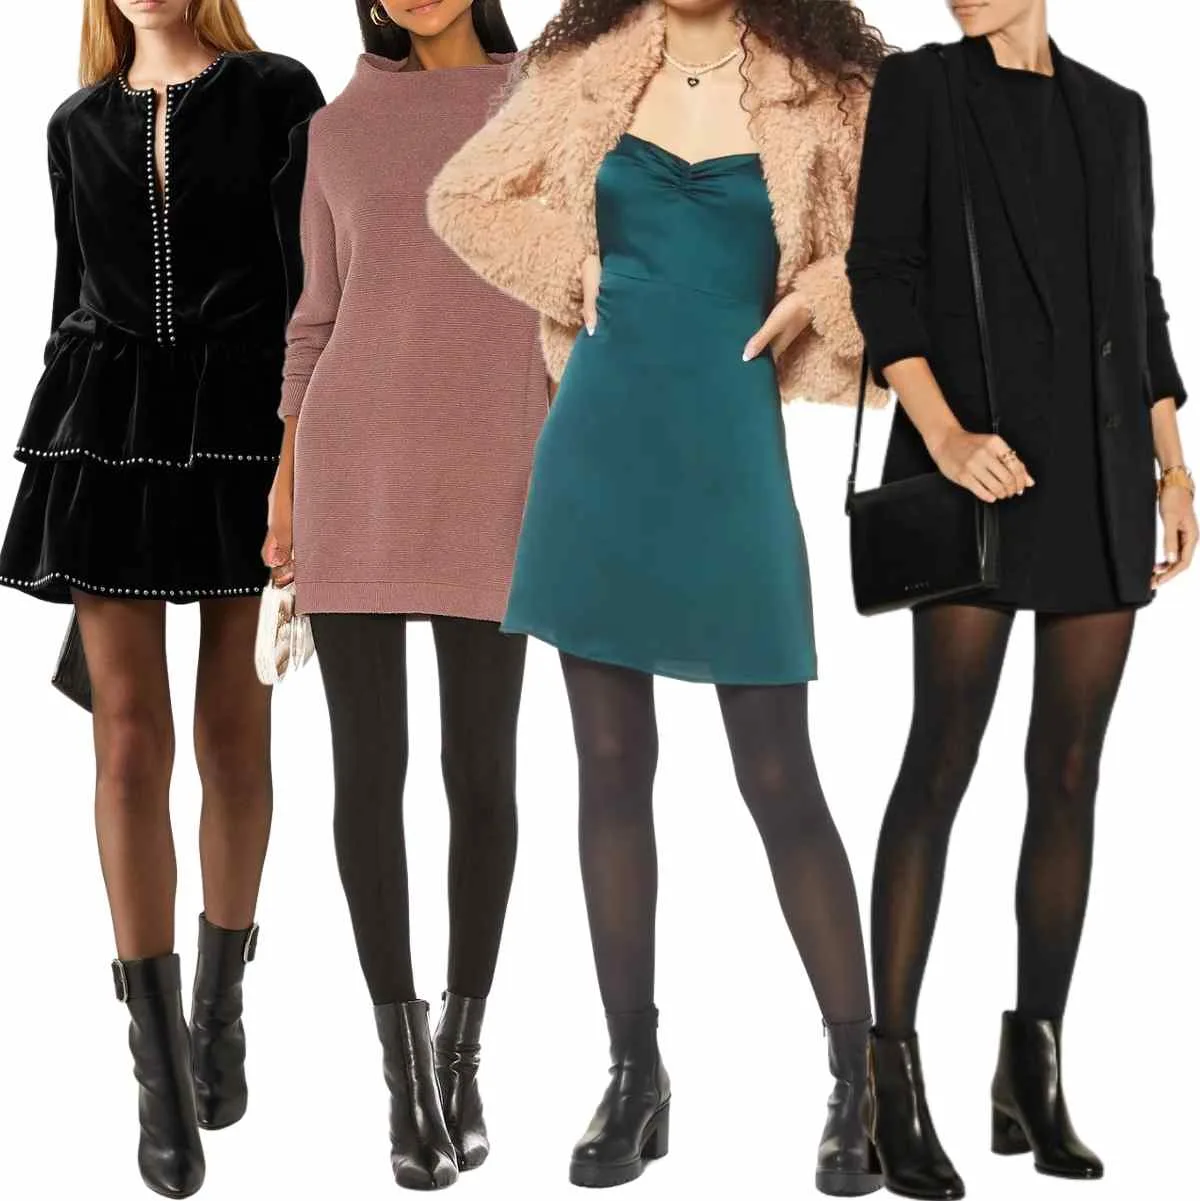 Collage of 4 women wearing different ankle boots with dresses and tights and leggings.